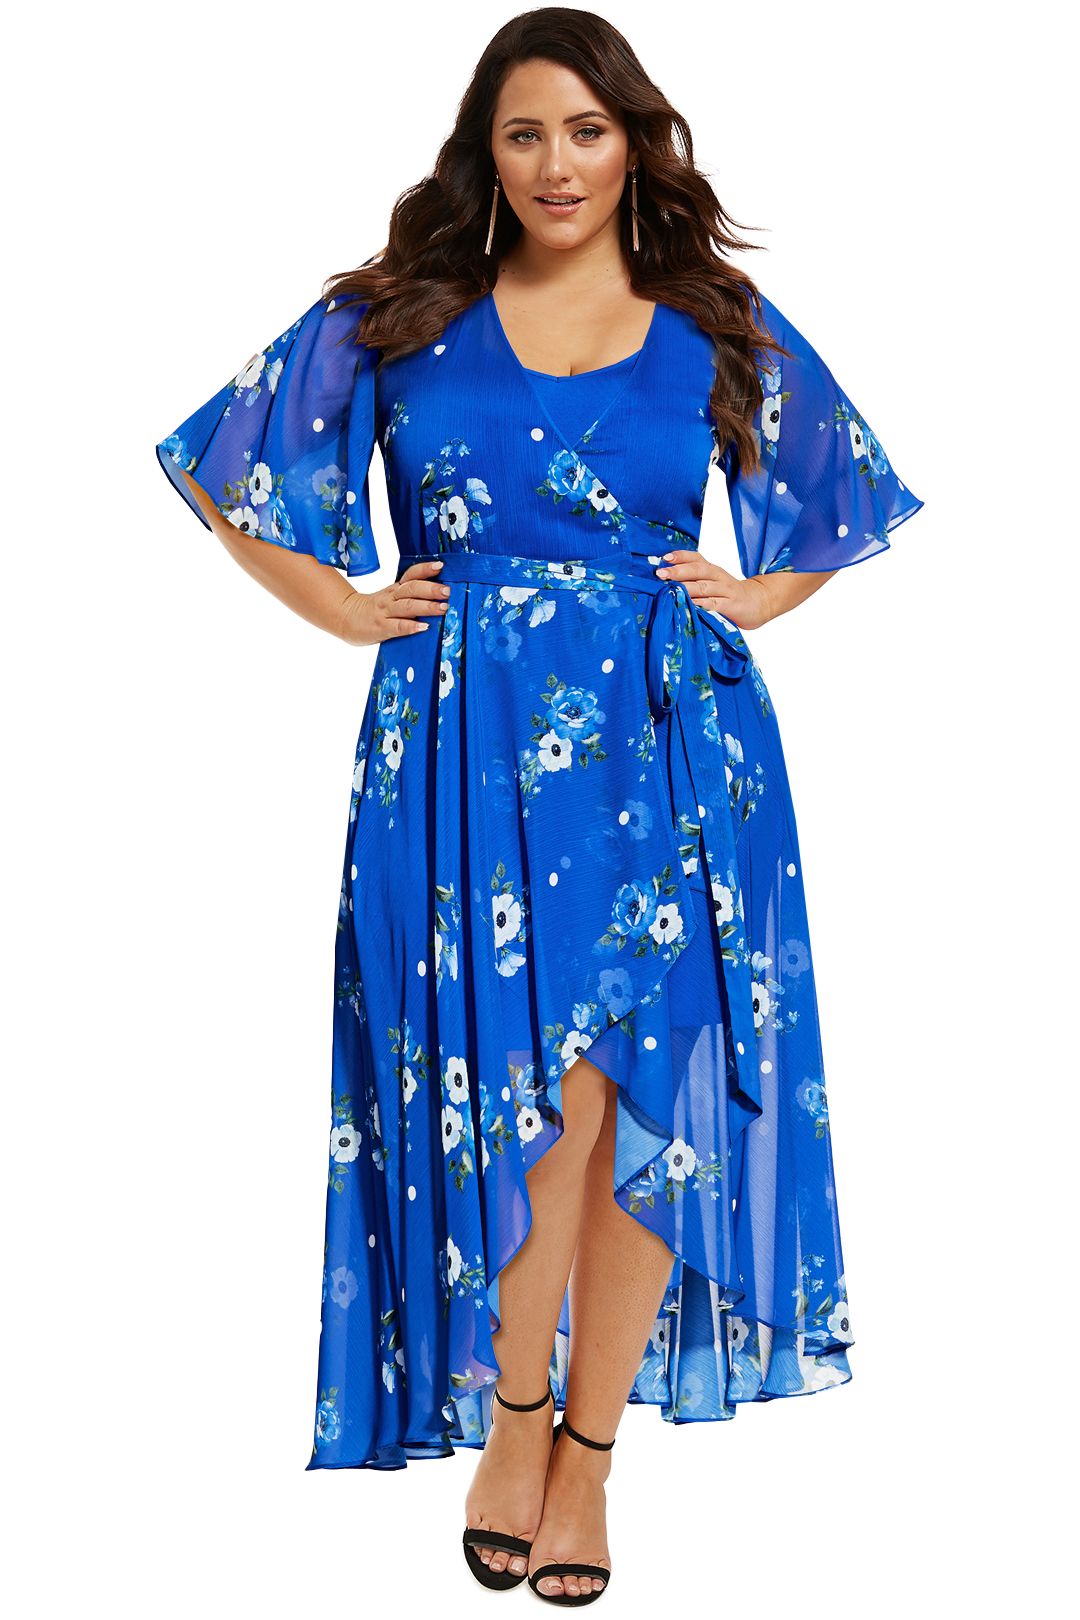 Blue Floral Maxi Dress by City Chic for ...